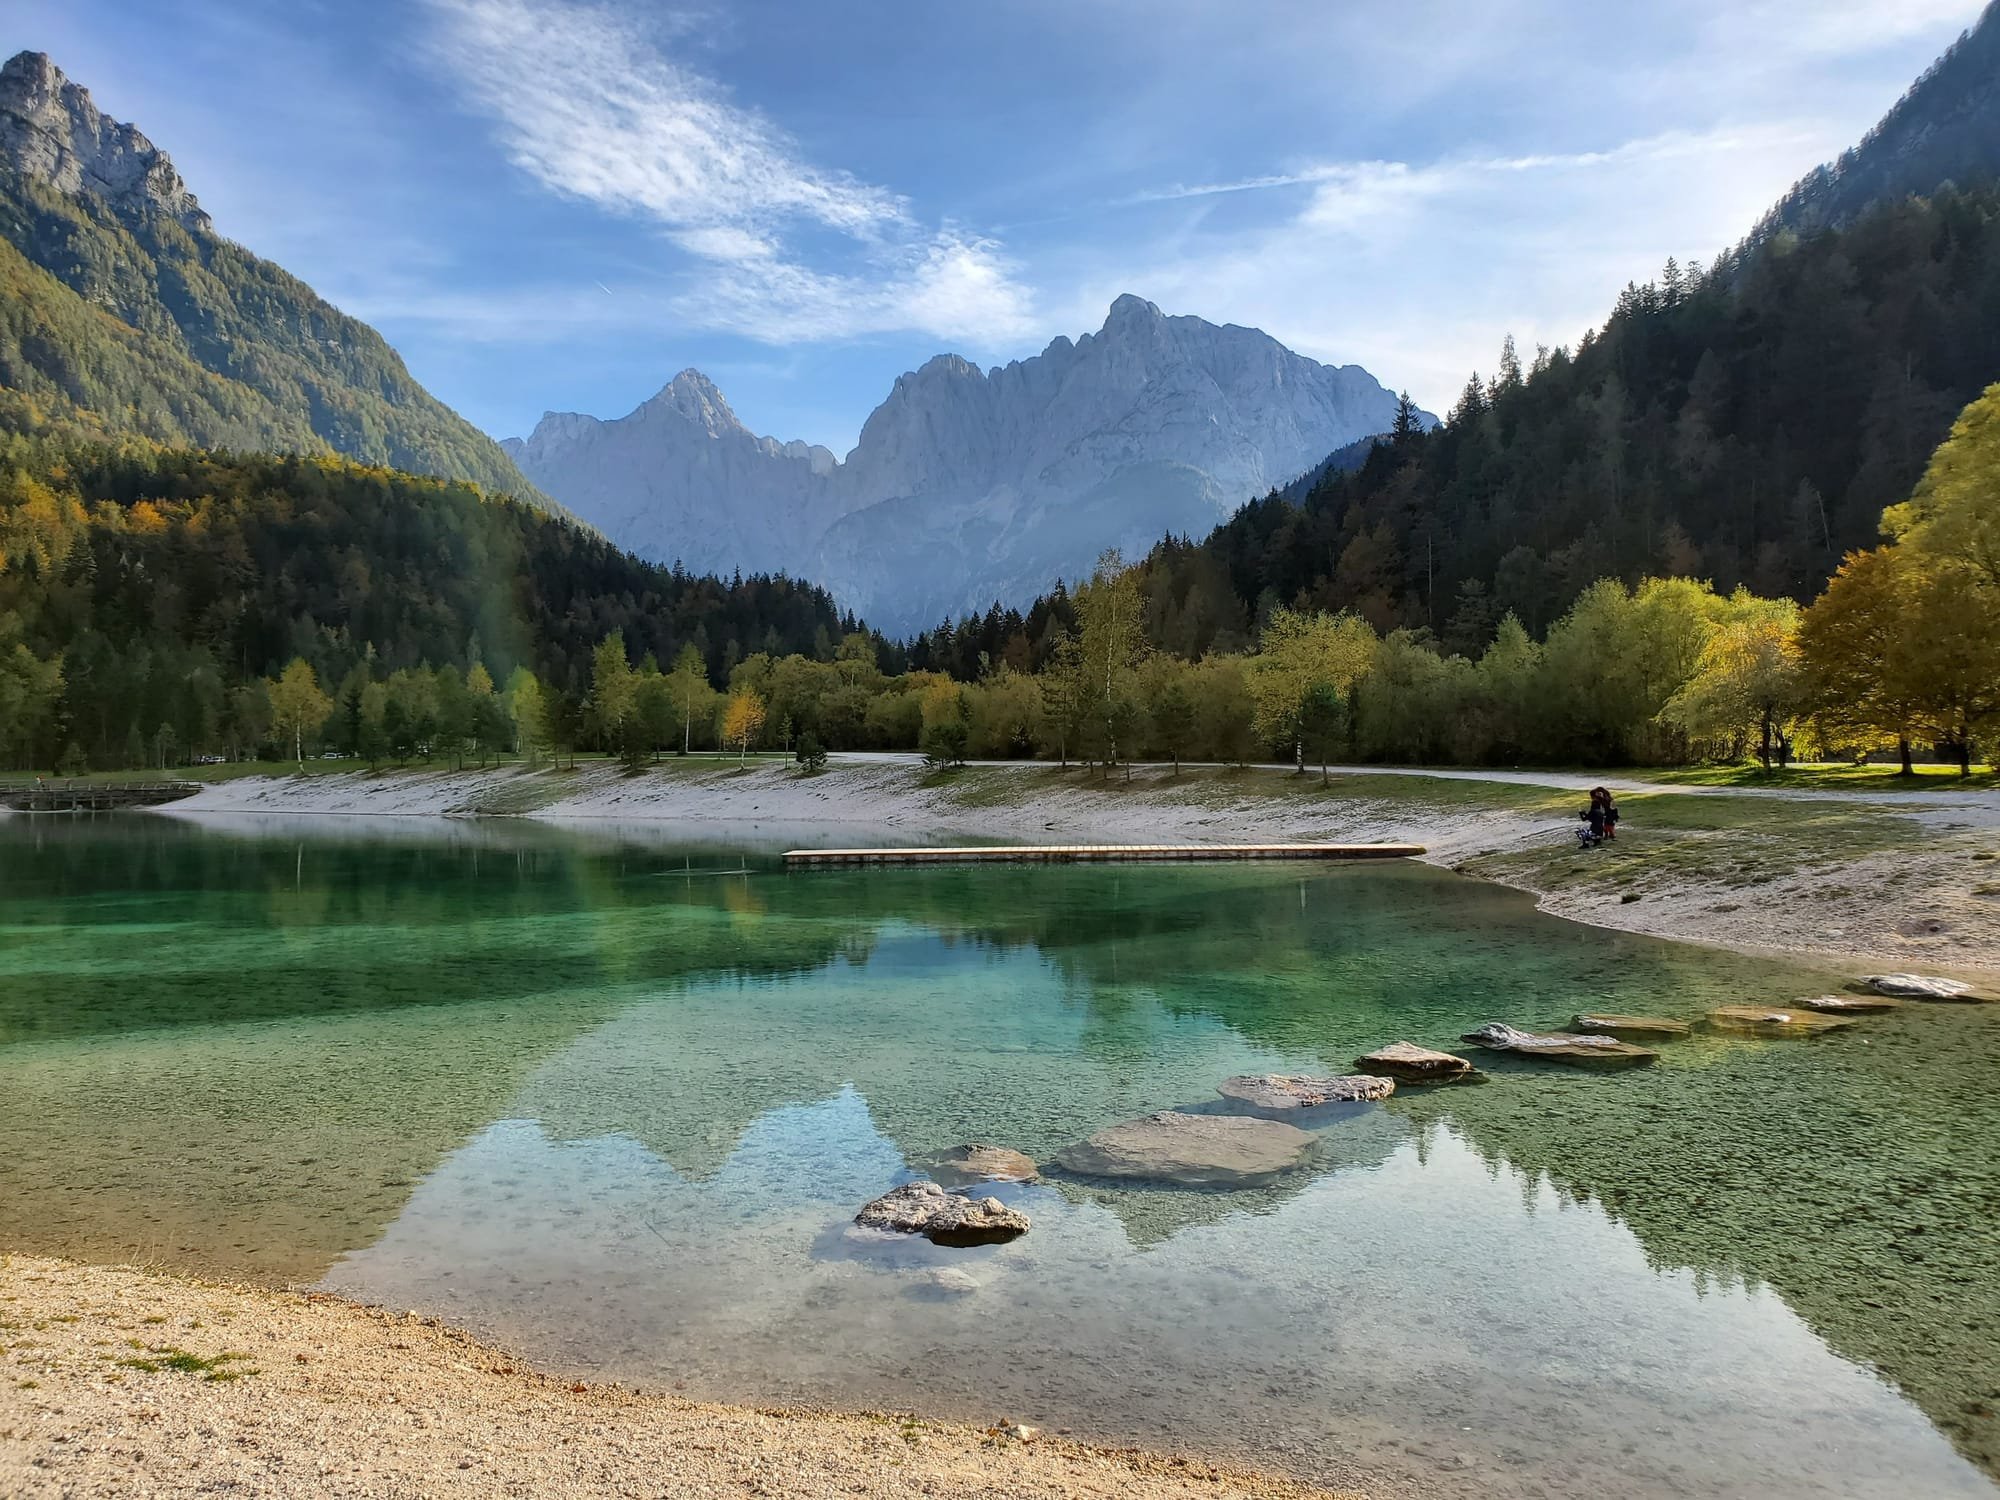 Julian Alps day tour from Bled or Ljubljana